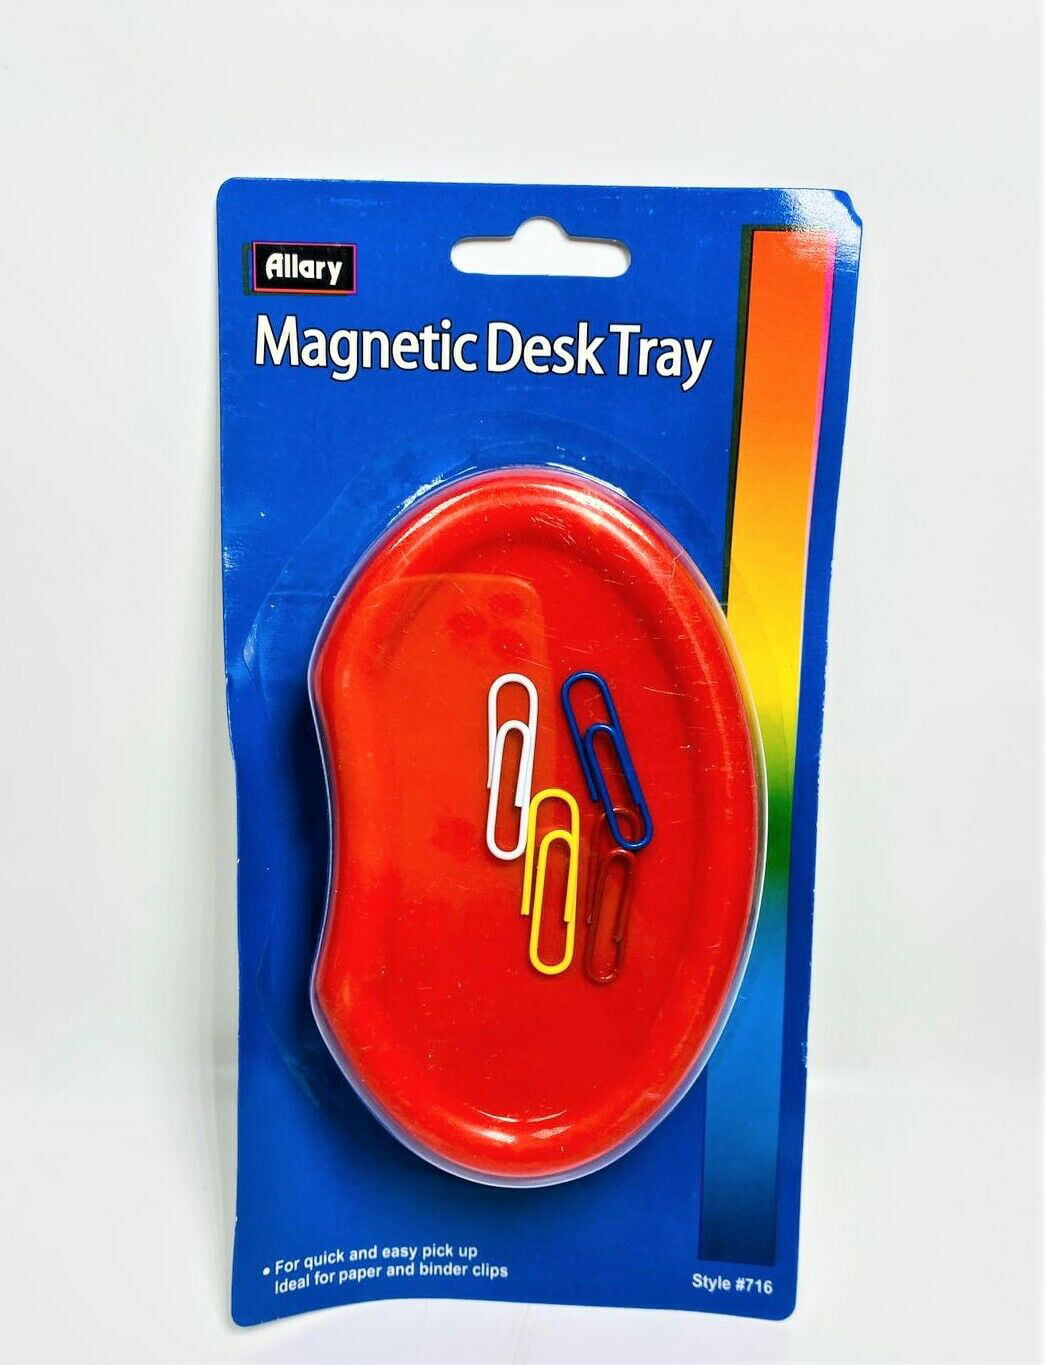 Red Home and Office Desk Organizer 4.25 x 1.25 x 2.875 Inches Pin Caddy 2-Pack Magnetic Pincushion Paper Clip Holder for Push Pins Hair Bobby Pins Pin Cushion Sewing Needles